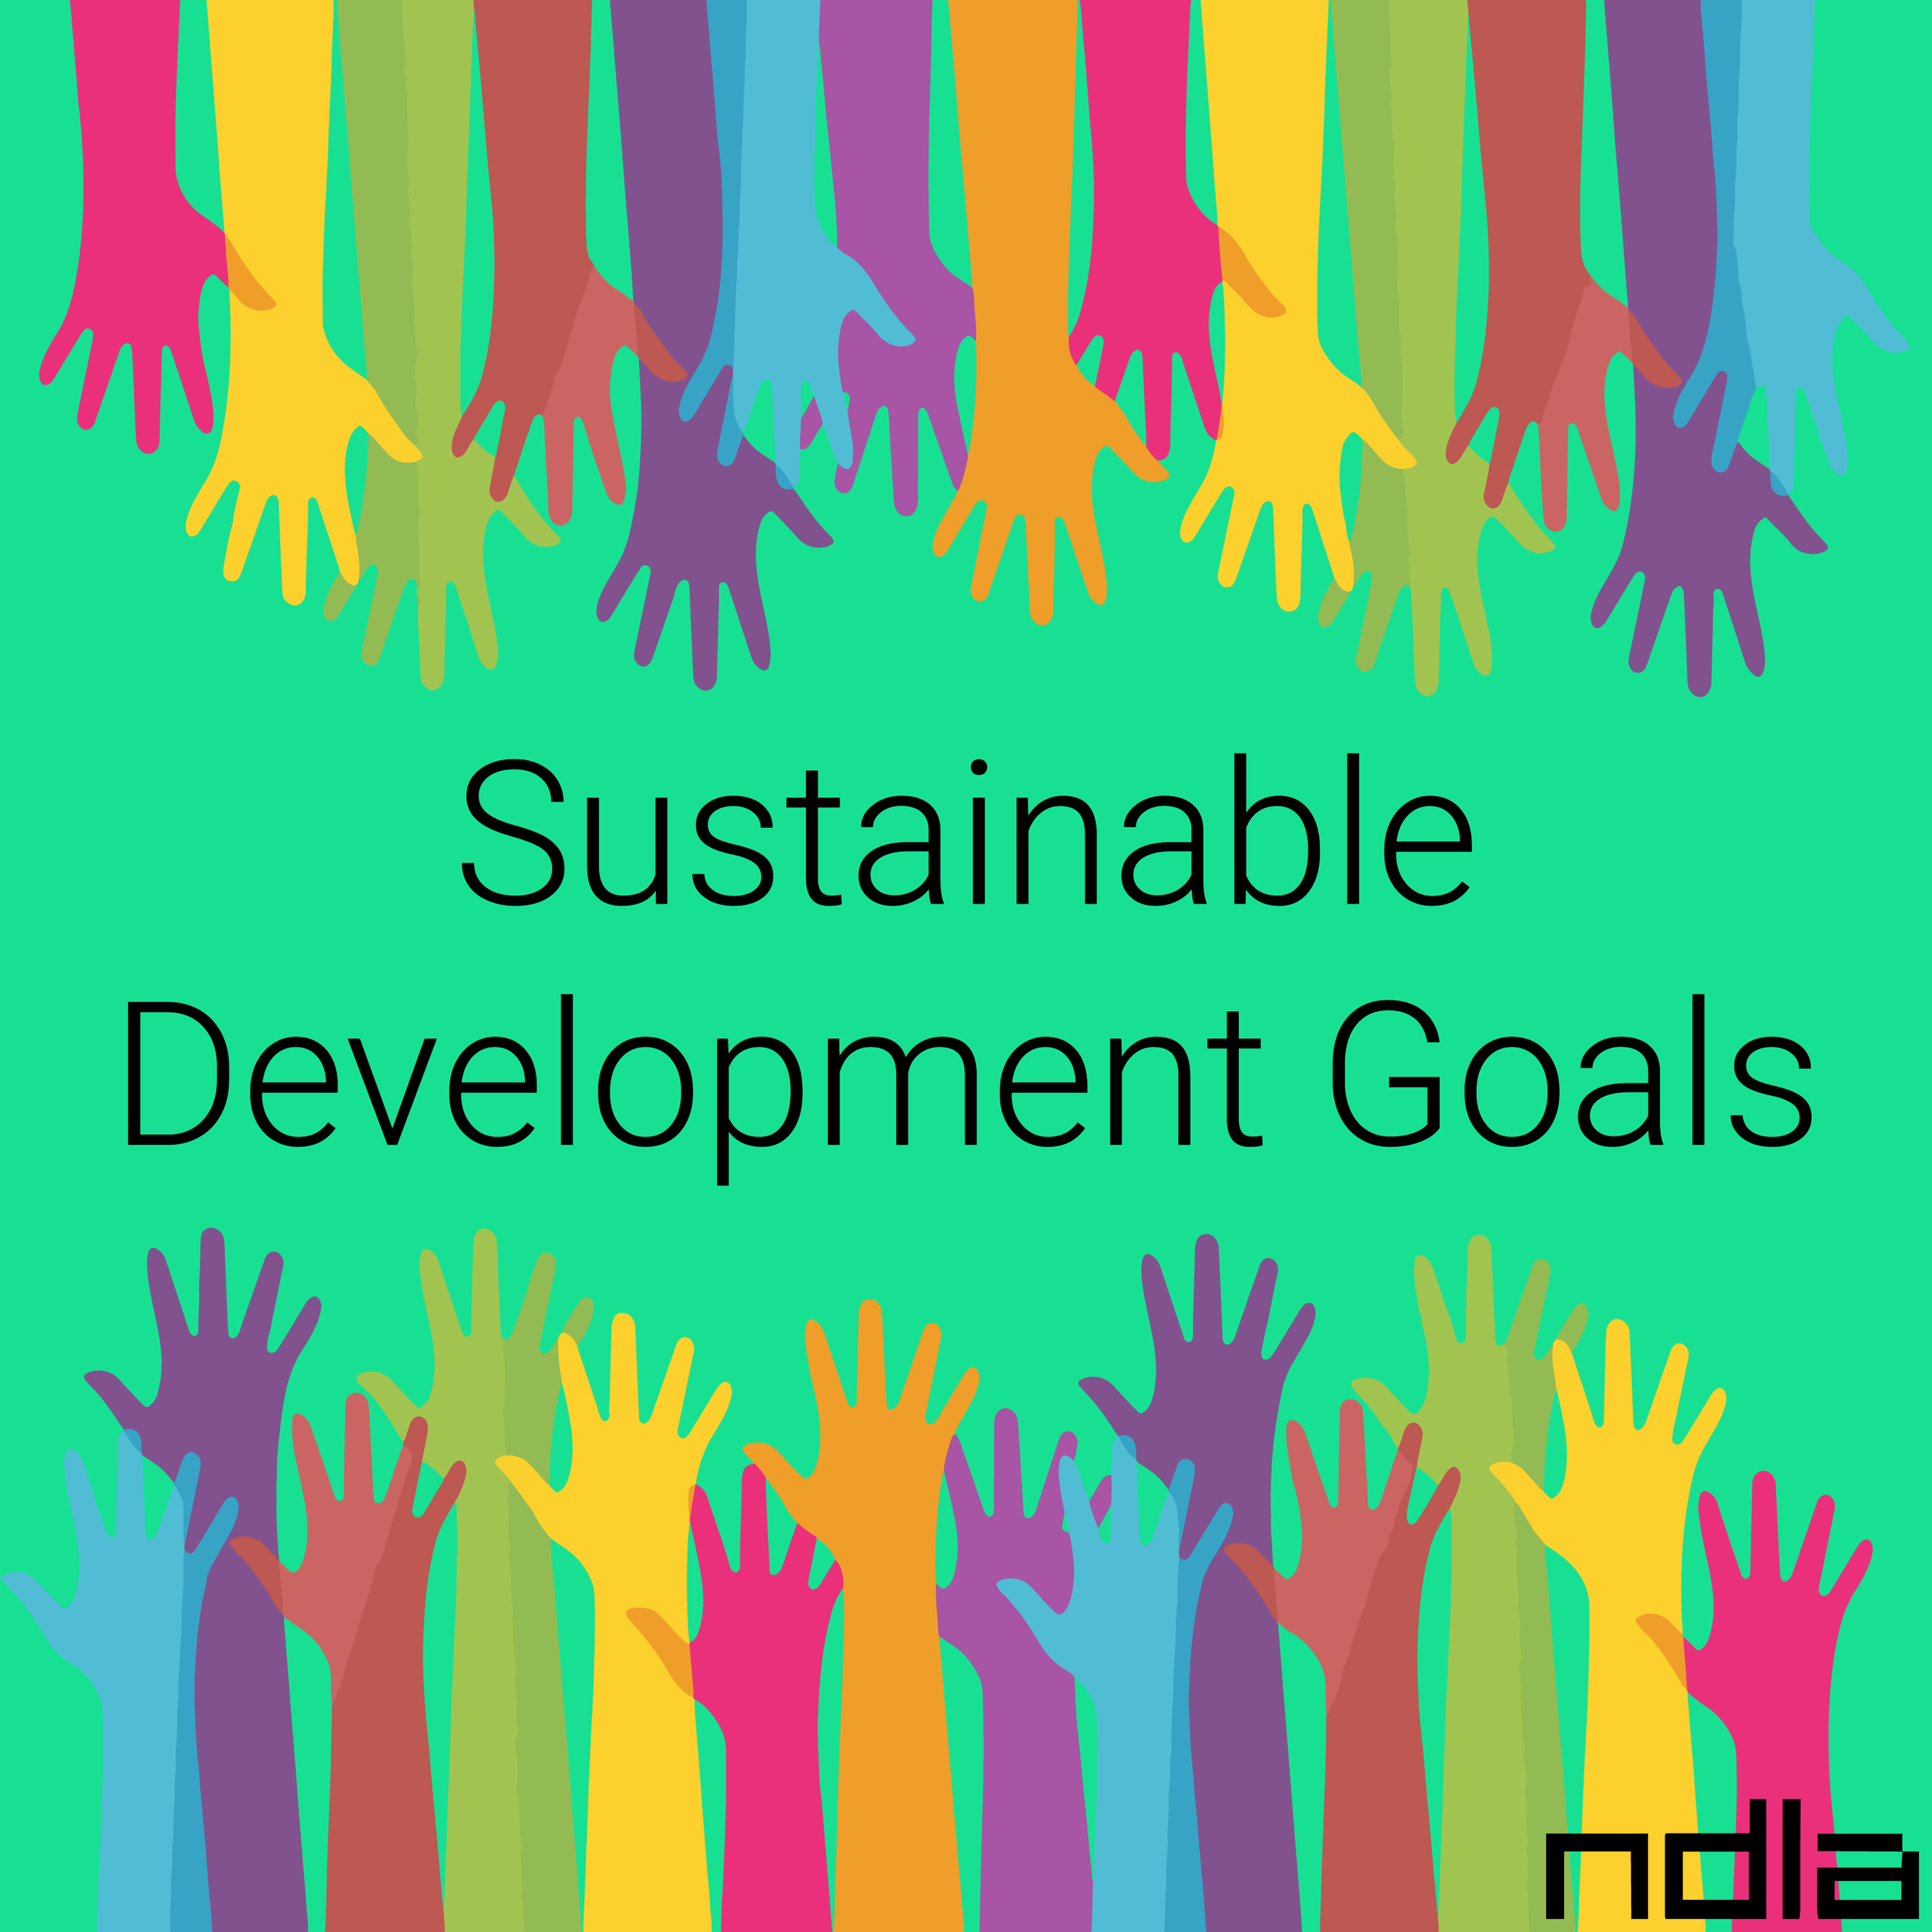 Illustration: Hands in many colours reach towards the title 'Sustainable Development Goals'. 